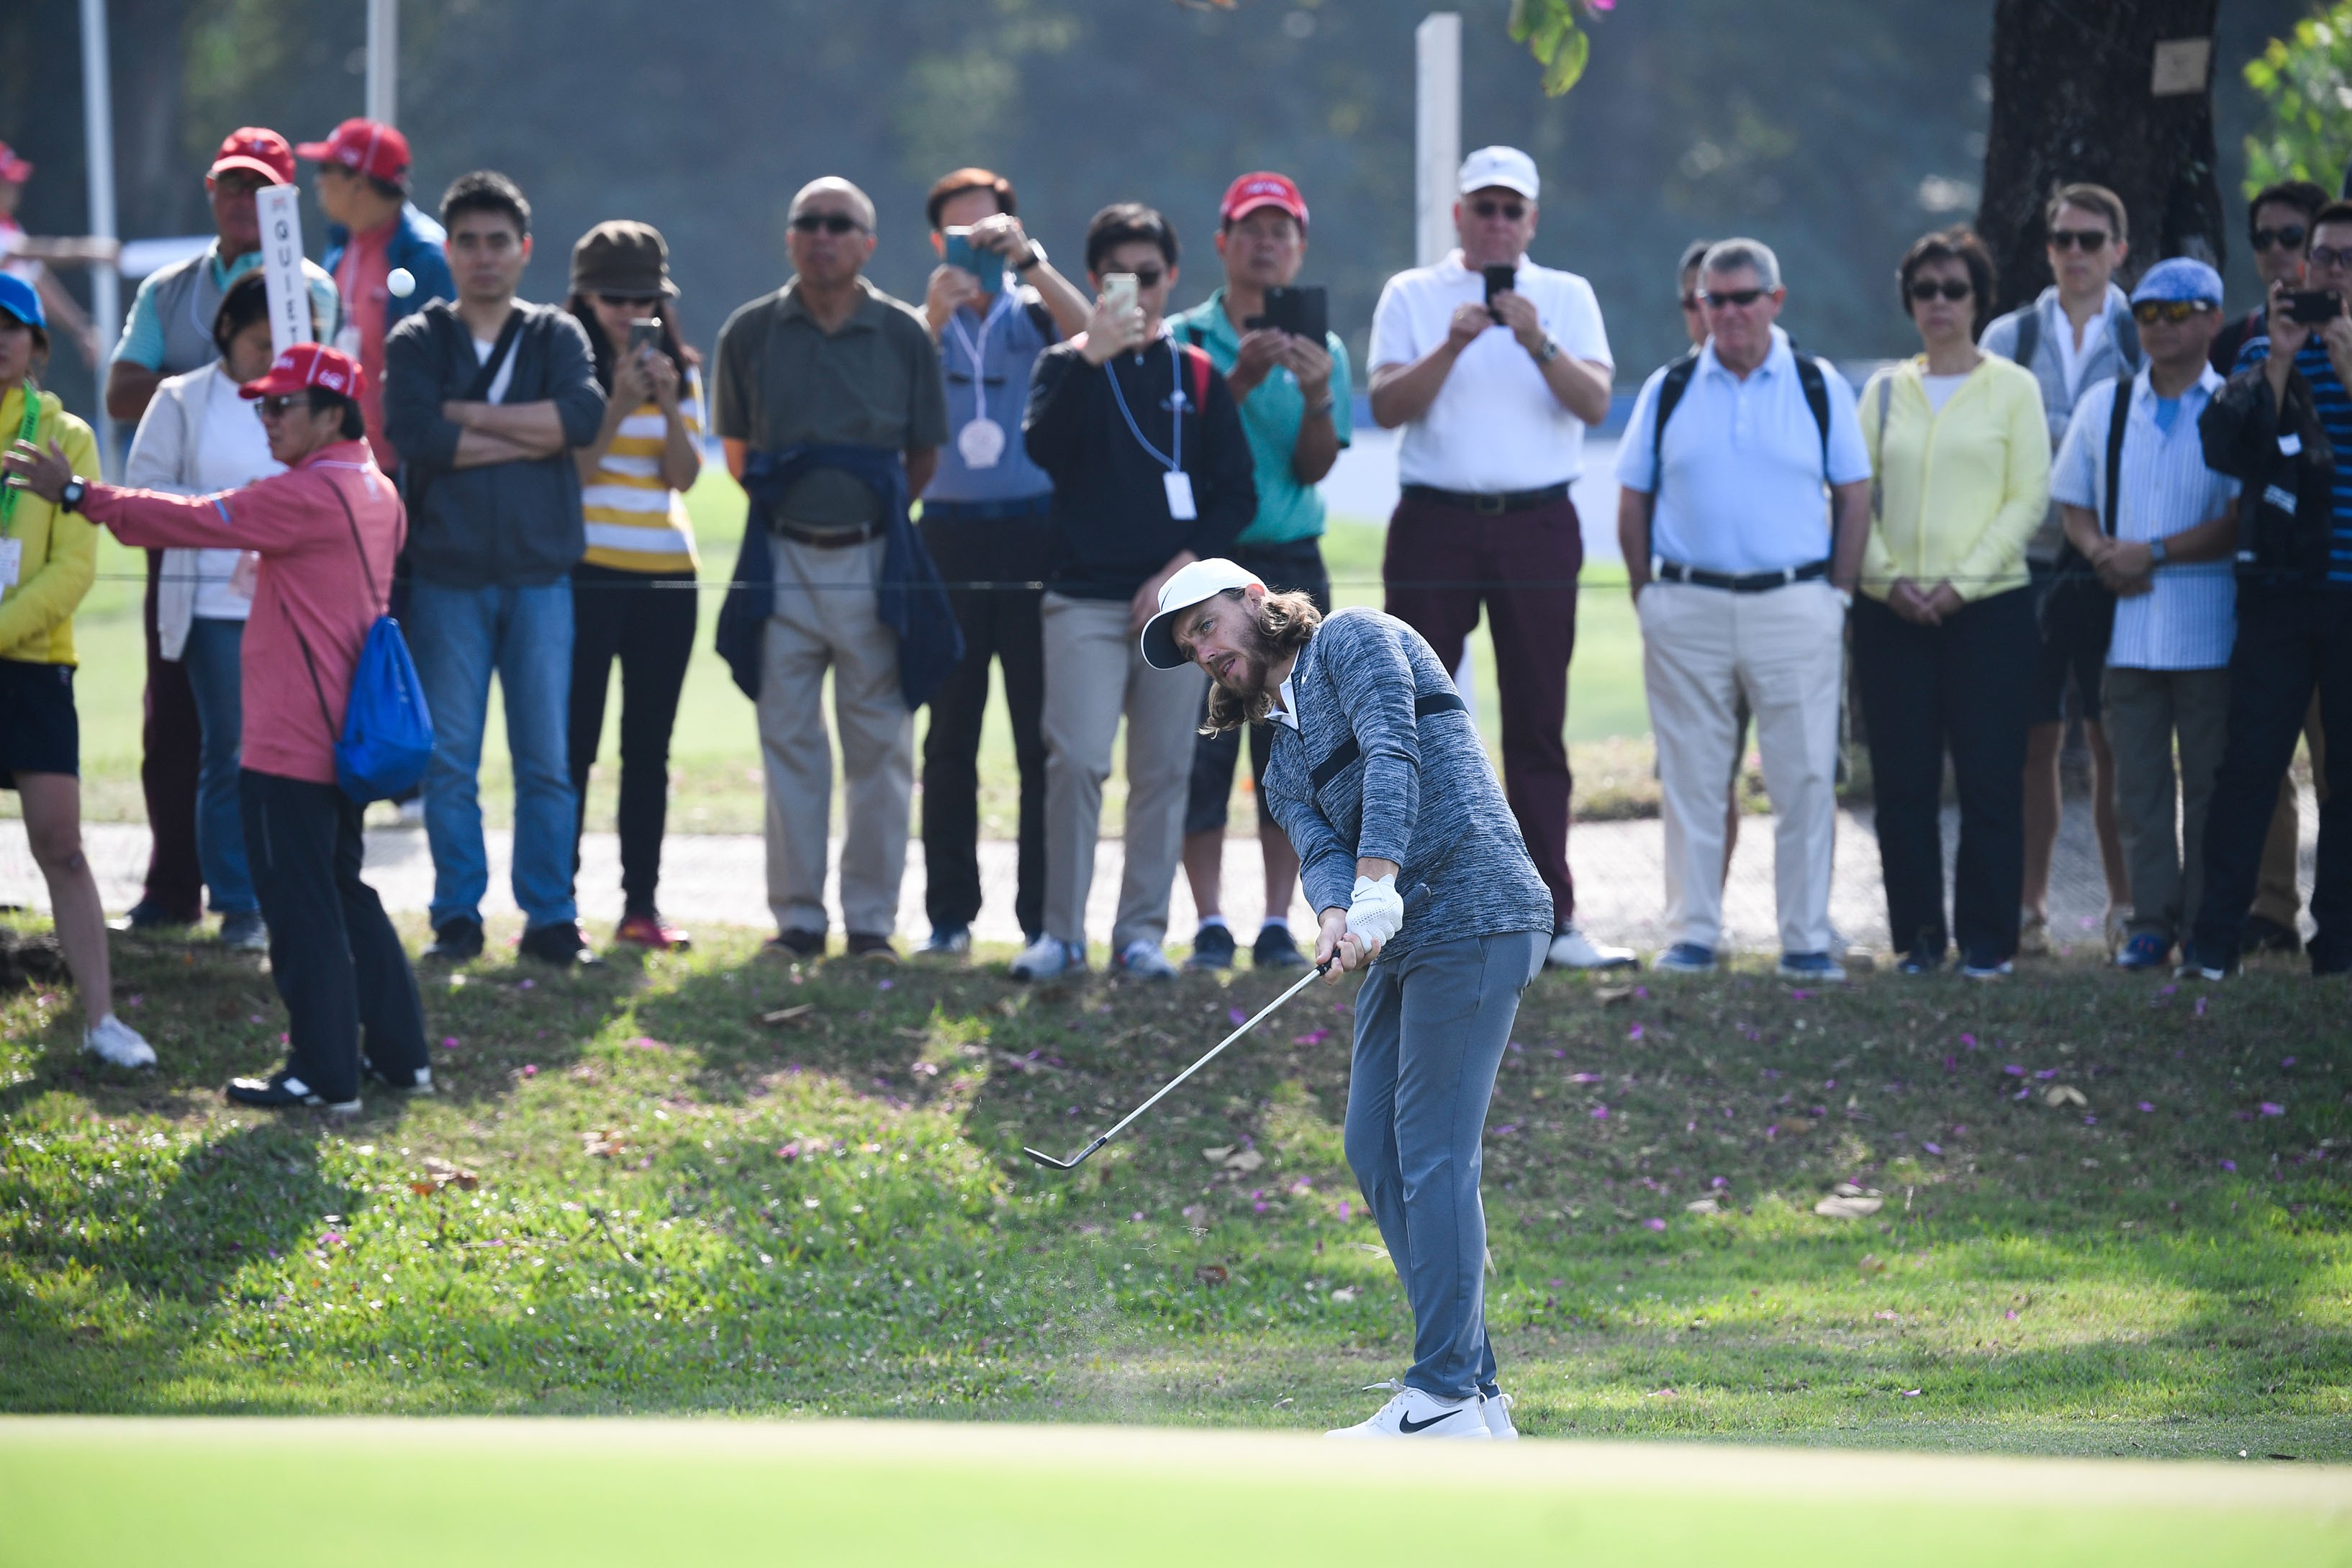 Tommy Fleetwood chips in front of the gallery. Photos: Richard Castka